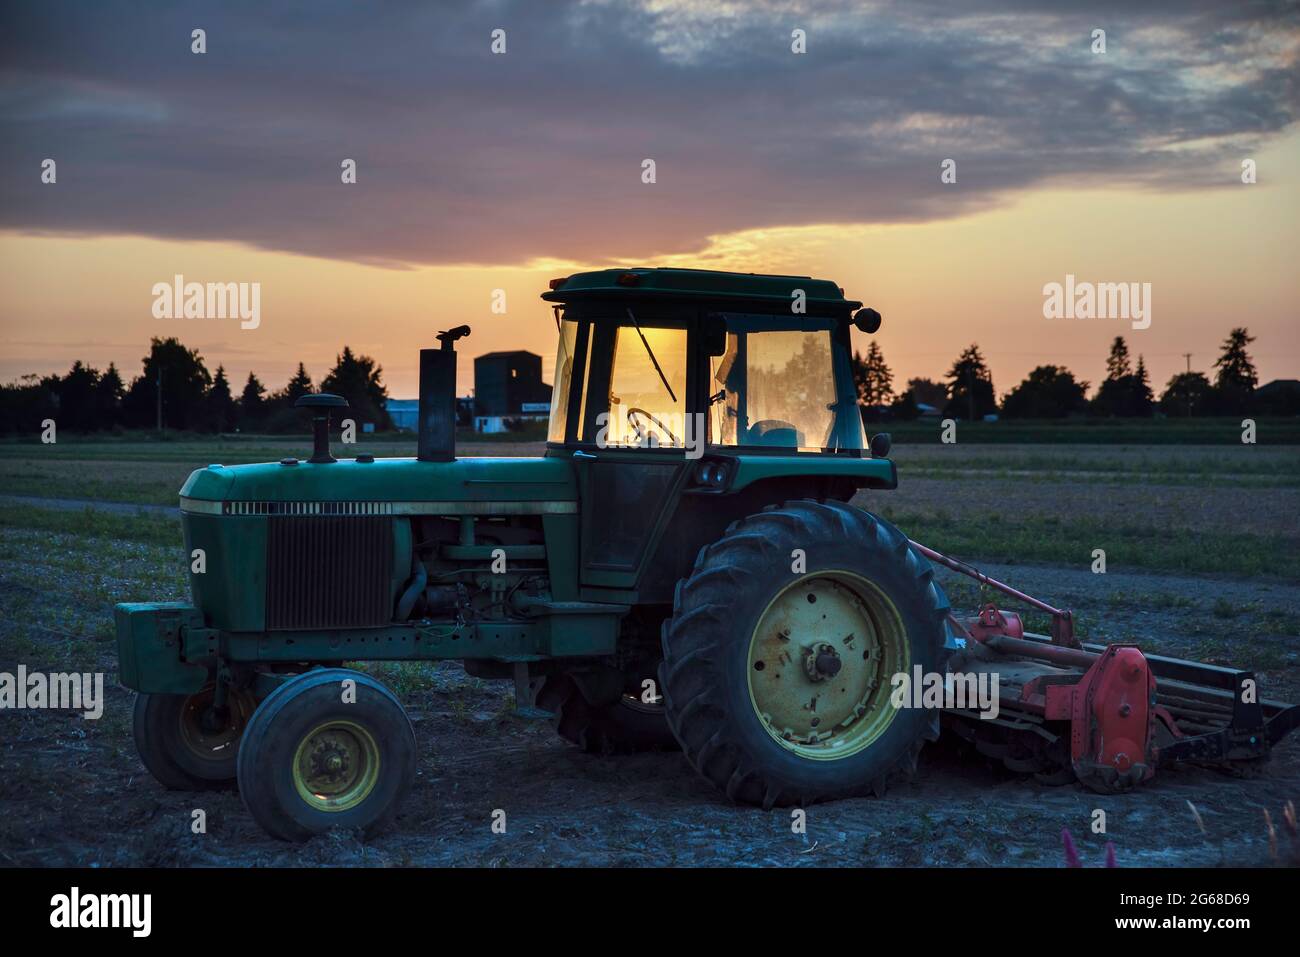 A green tractor with a hitch, illuminated by the rays of the setting sun, stands in a field on a warm summer evening. Green trees and huge sky with be Stock Photo